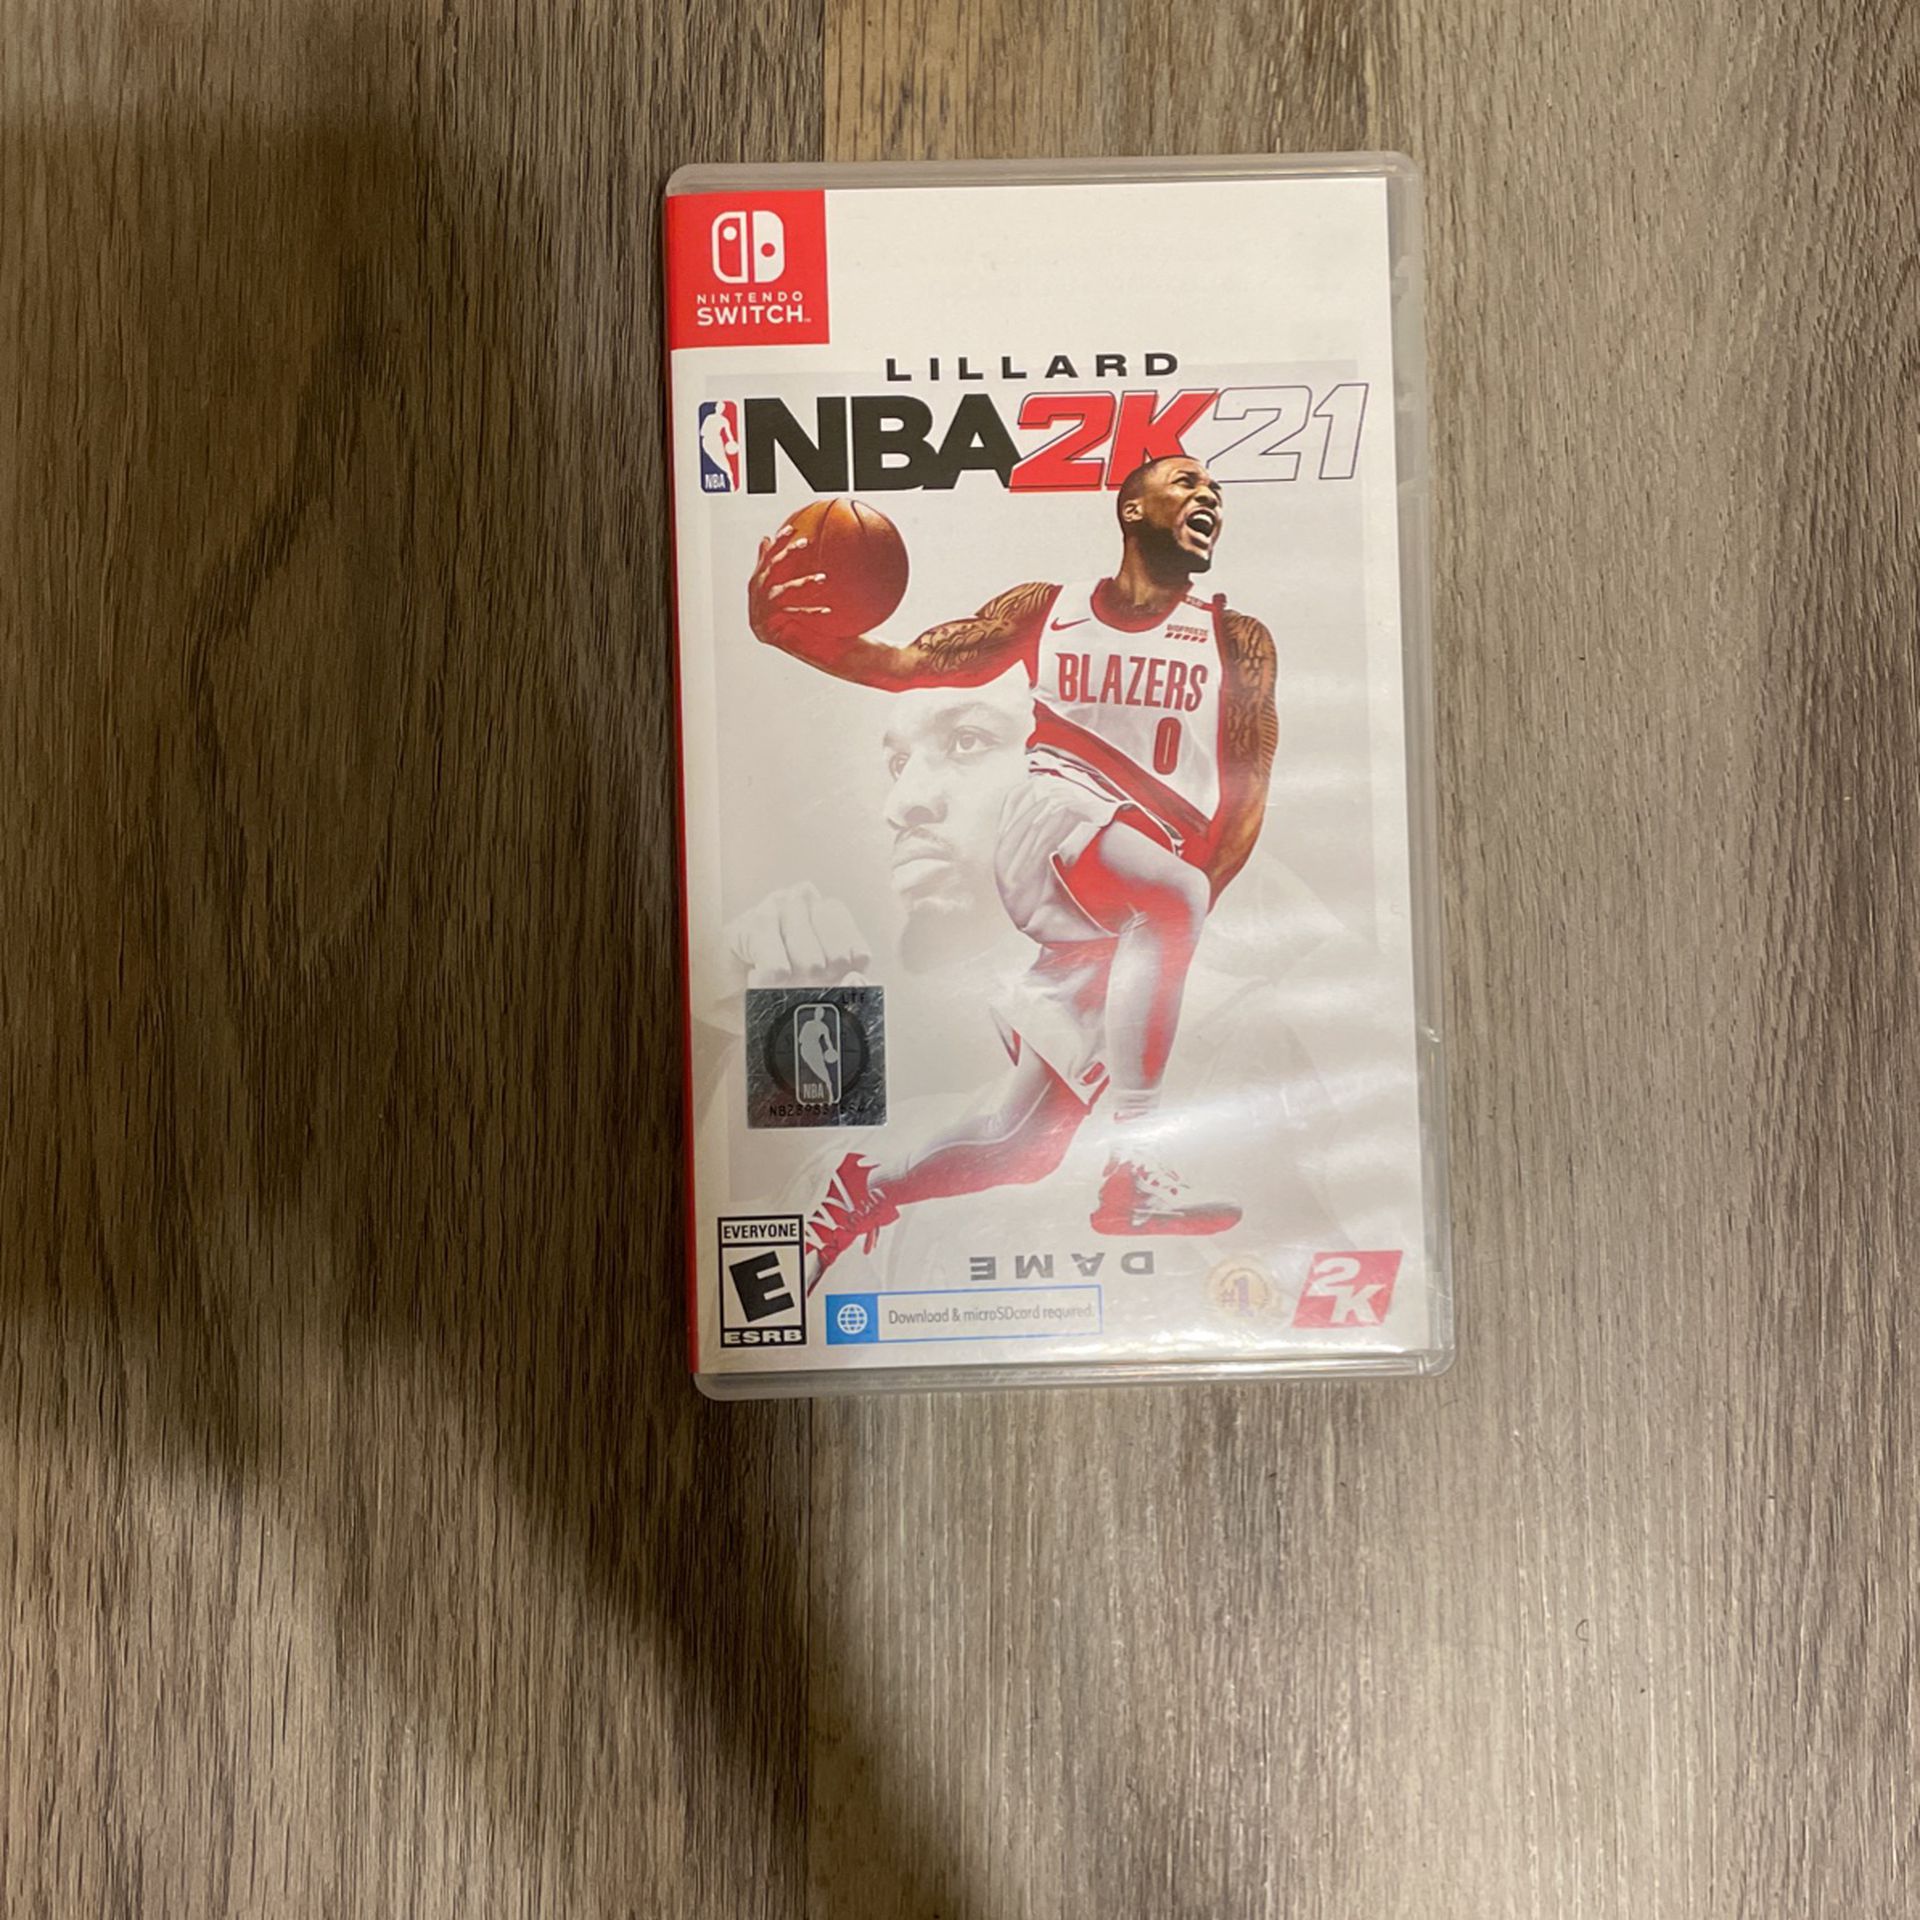 NBA 2k 21 For The Nintendo Switch